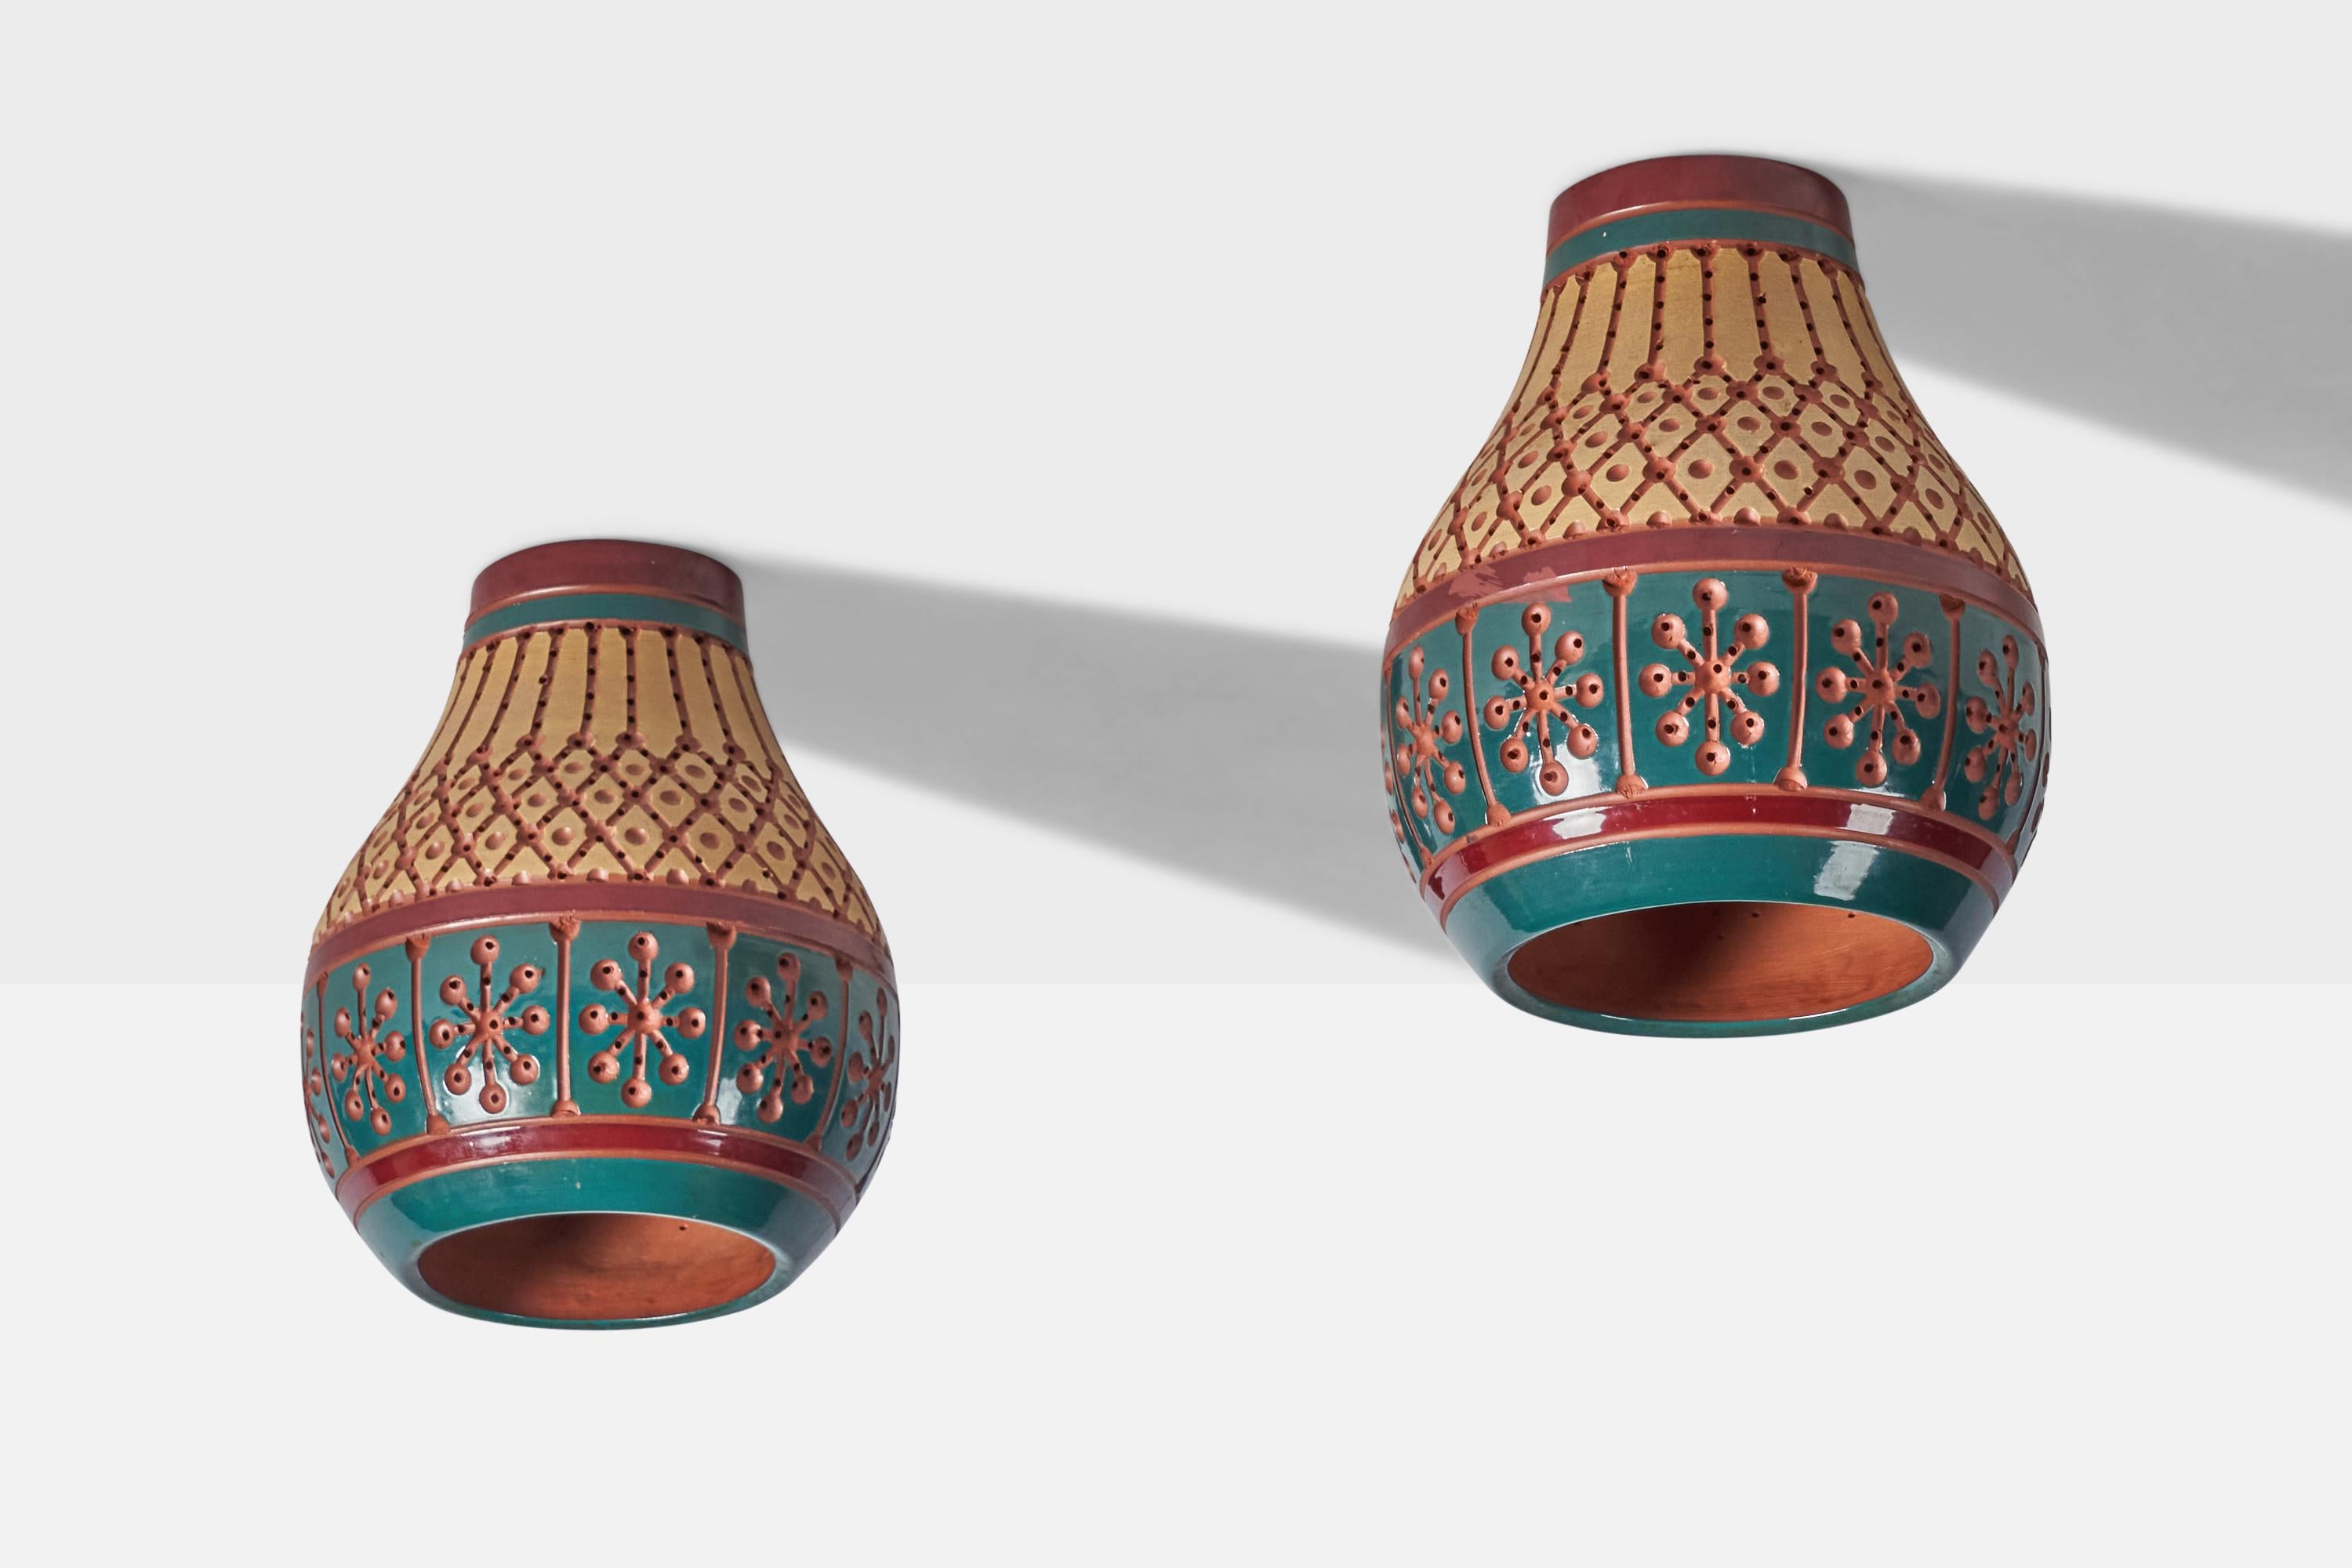 A pair of hand-painted yellow, red and blue ceramic flush mounts or pendant lights, designed and produced by Martha & Beaumont Mood, San Antonio, Texas, USA, 1970s 

Overall Dimensions (inches): 12.5” H x 11” Diameter
Bulb Specifications: E-26